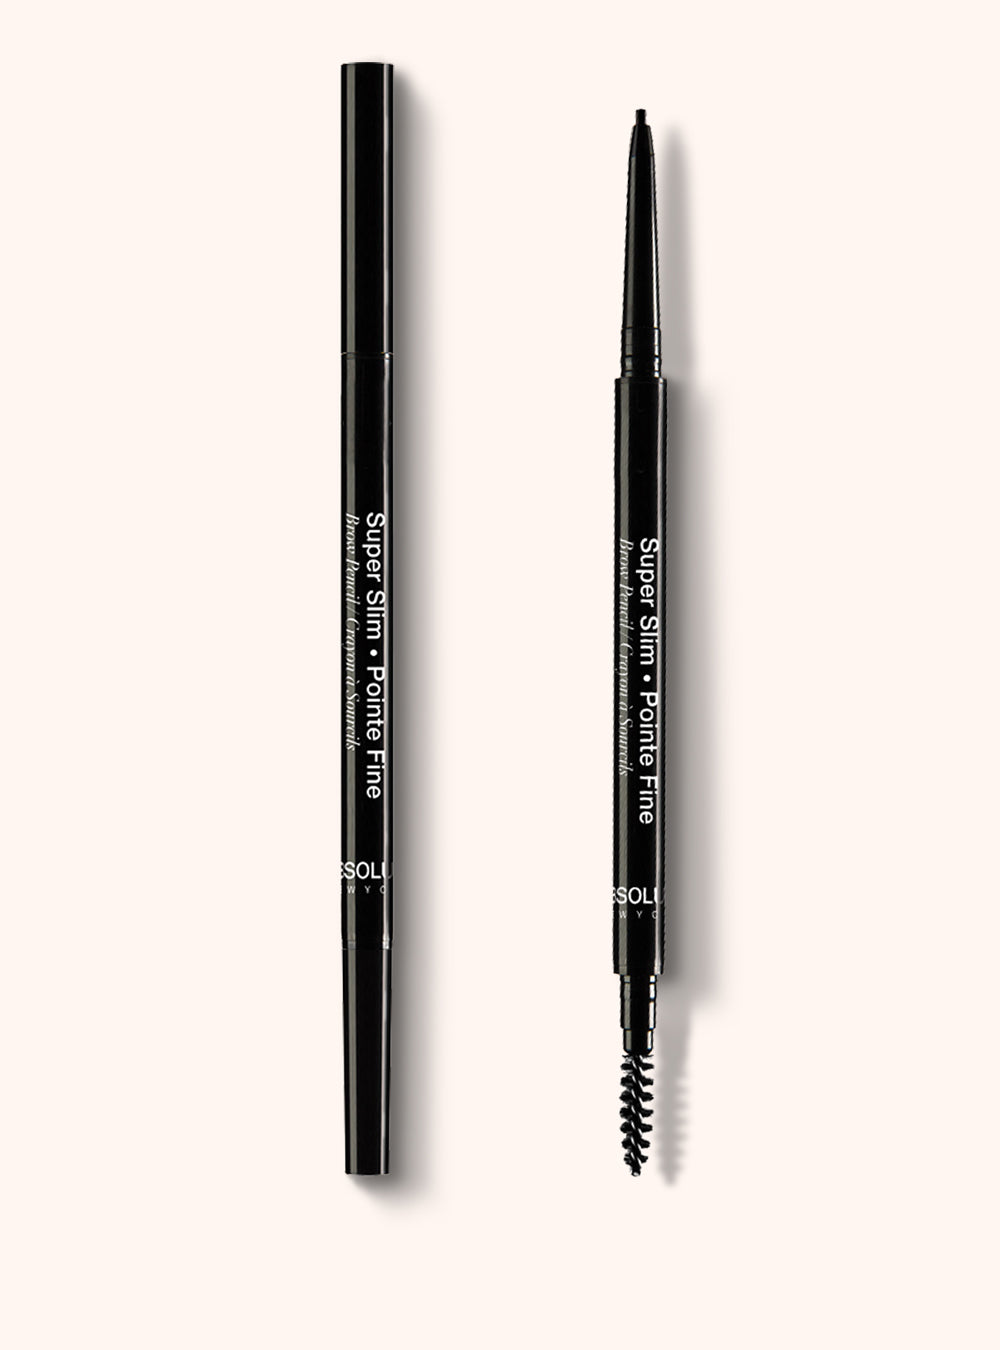 Get - Slim Pencil New Brow Fine-Tip Super Hair-Like Pencil Absolute – Brow Strokes York to